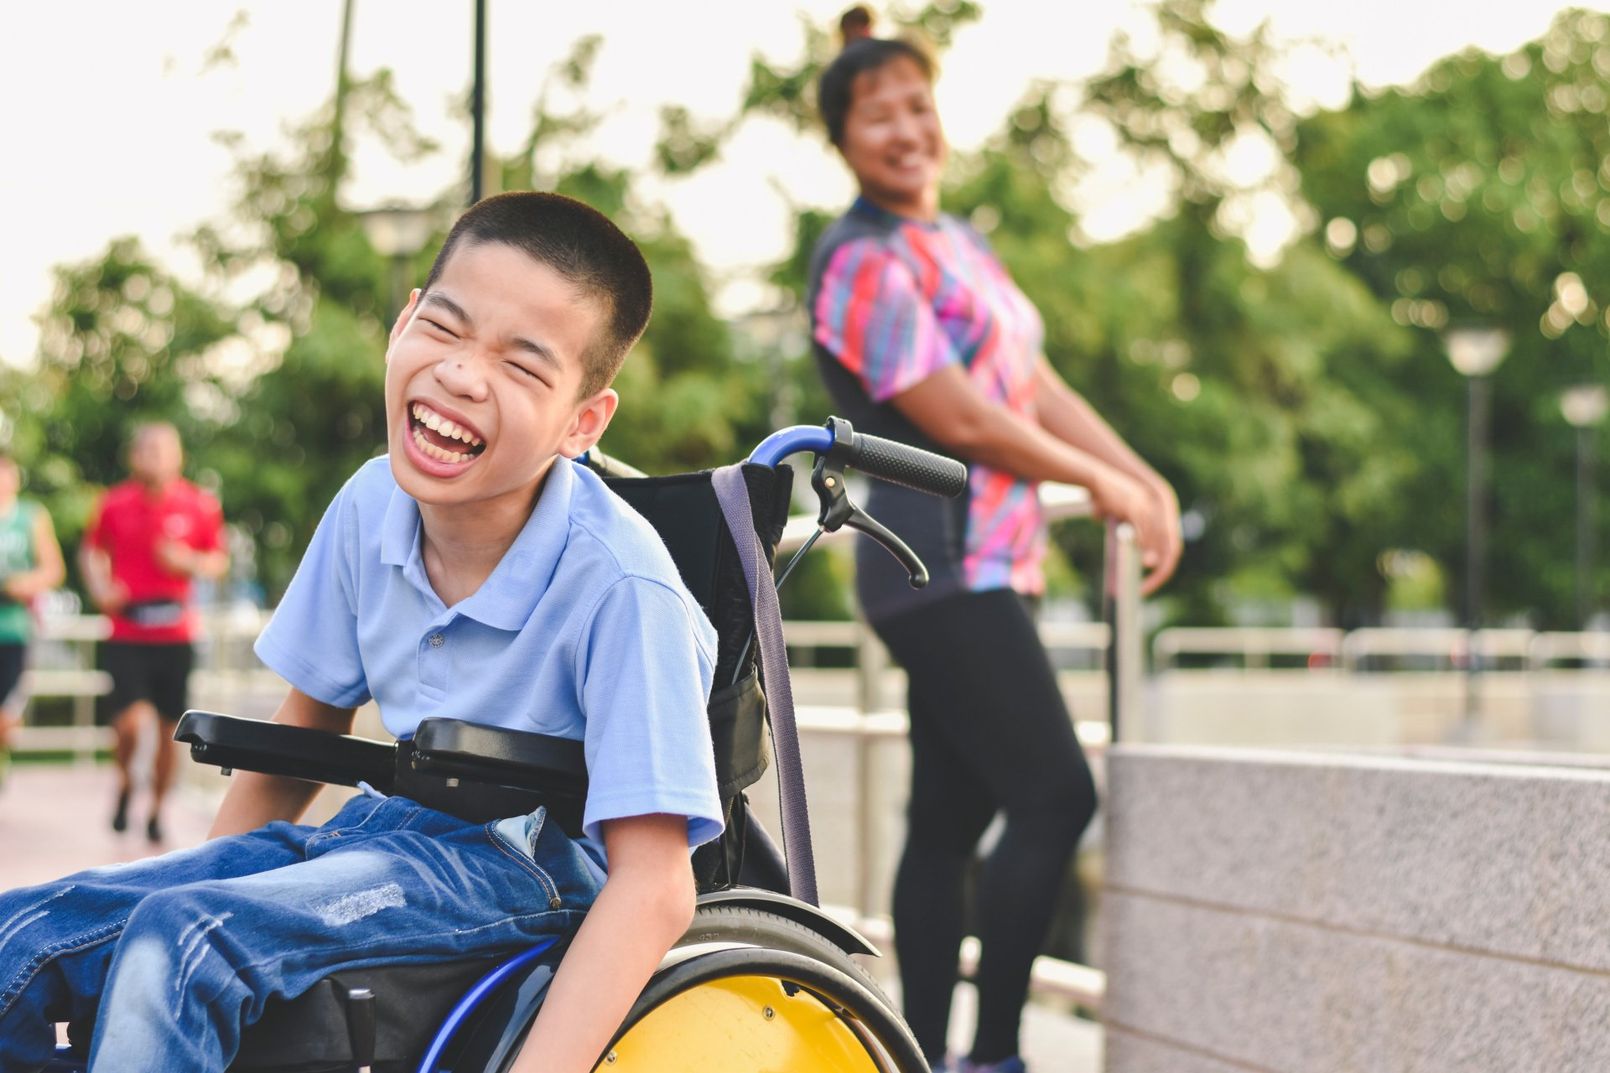 a young boy in a wheelchair is smiling while a woman stands behind him .